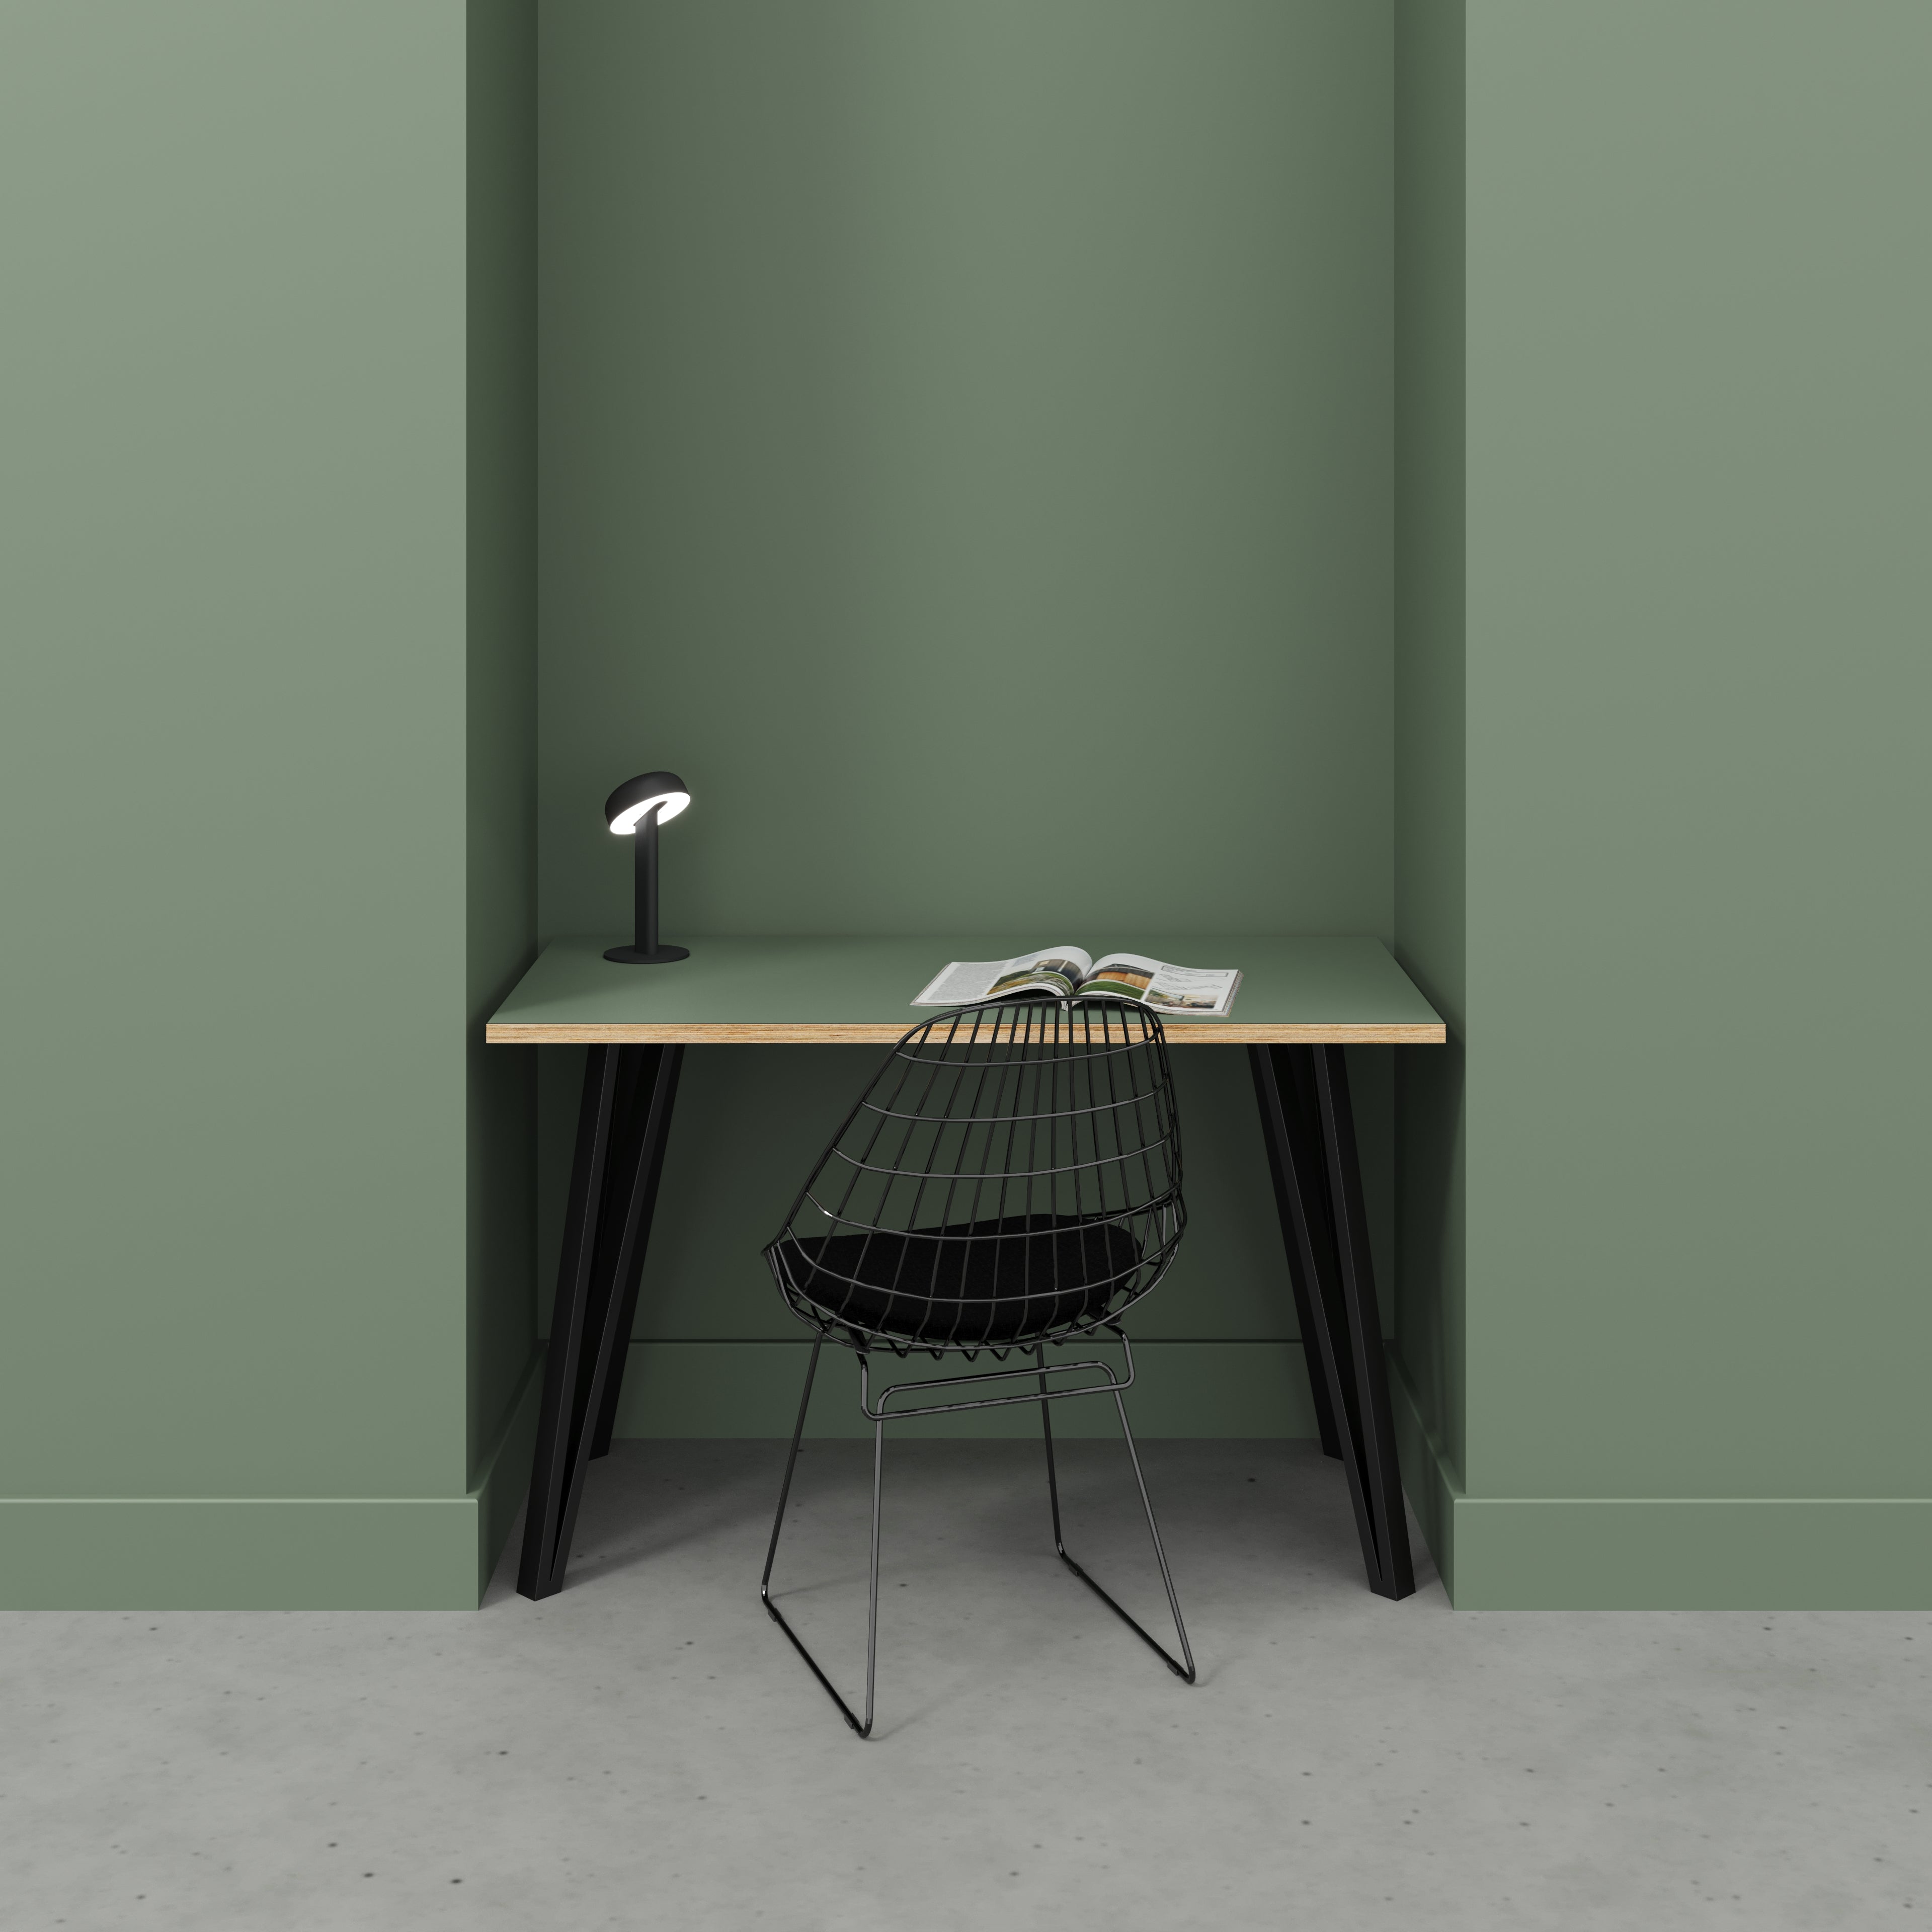 Desk with Black Box Hairpin Legs - Formica Green Slate - 1200(w) x 600(d) x 735(h)